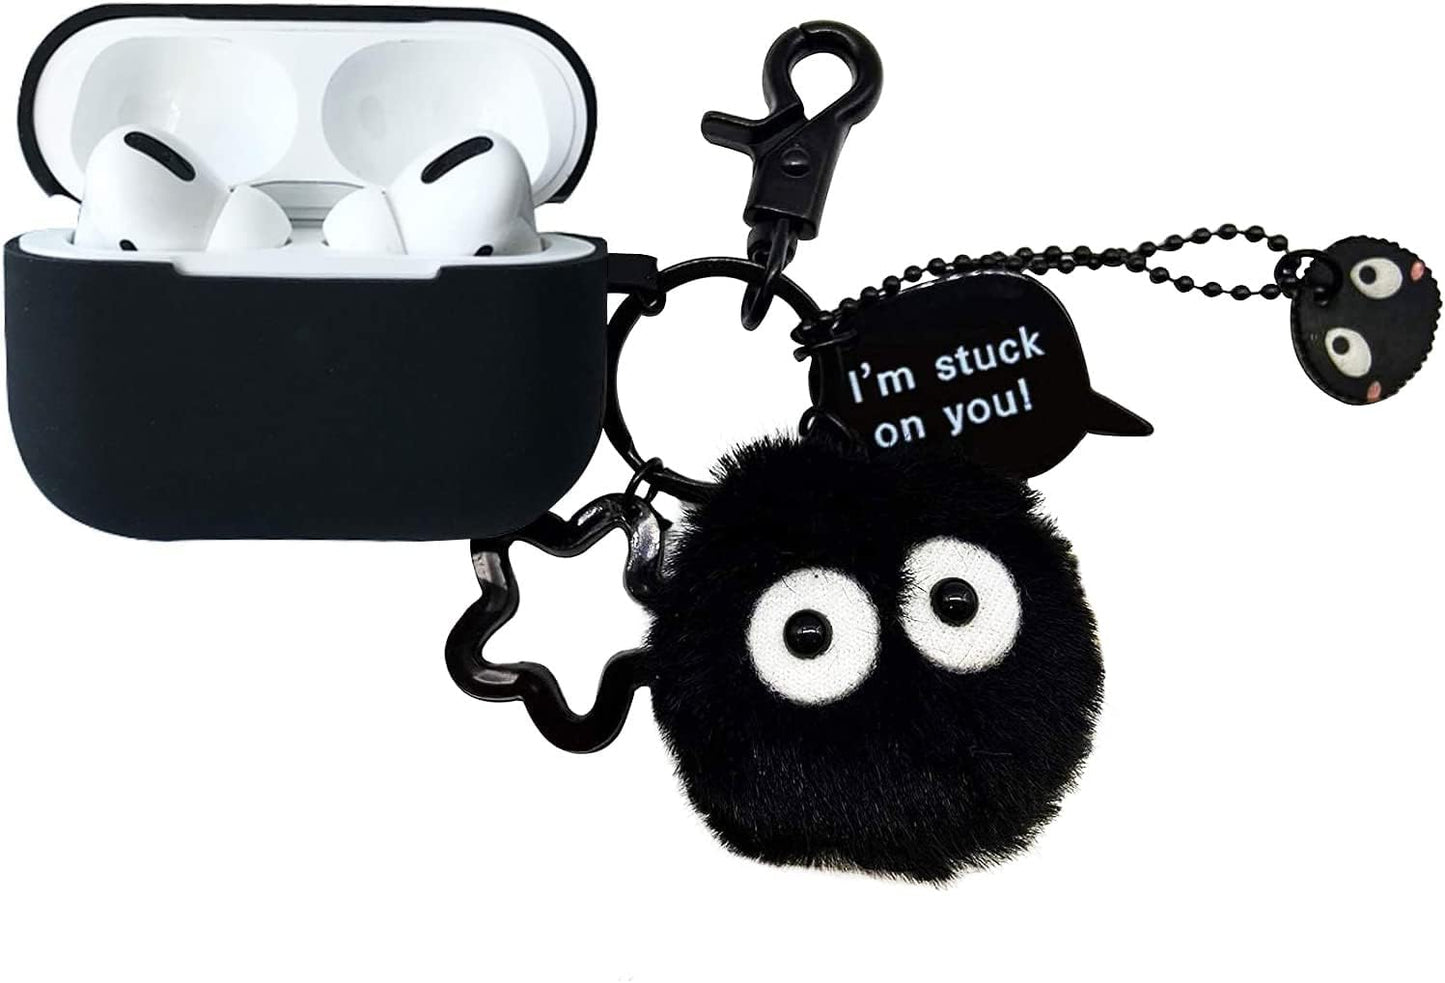 Dust Bunny Soot Sprite Plush Keychain (Style A) - Style a Adorable 2-Inch Plush Dust Bunny Keychain - A Soft and Stylish Accessory for Your Everyday Essentials"